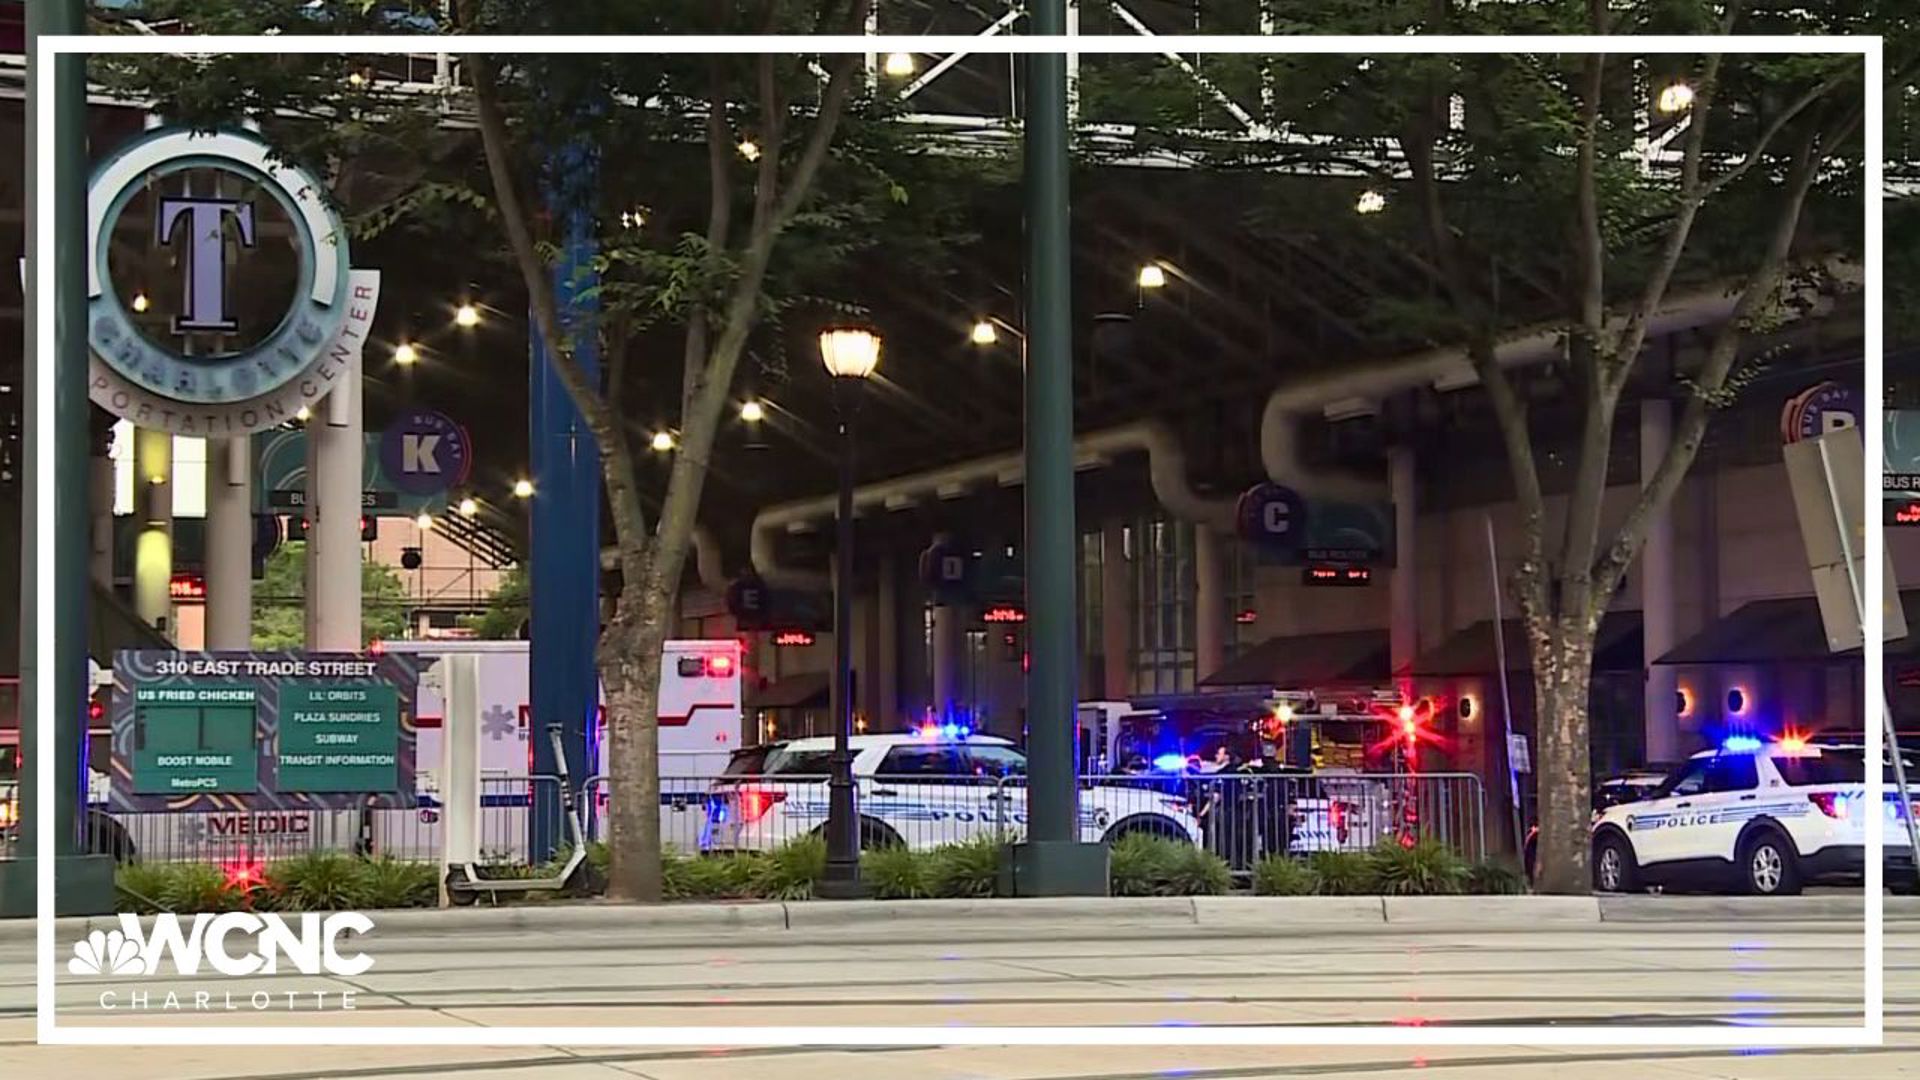 One person was taken to the hospital after being shot near the transportation center in Uptown early Monday, officials said.